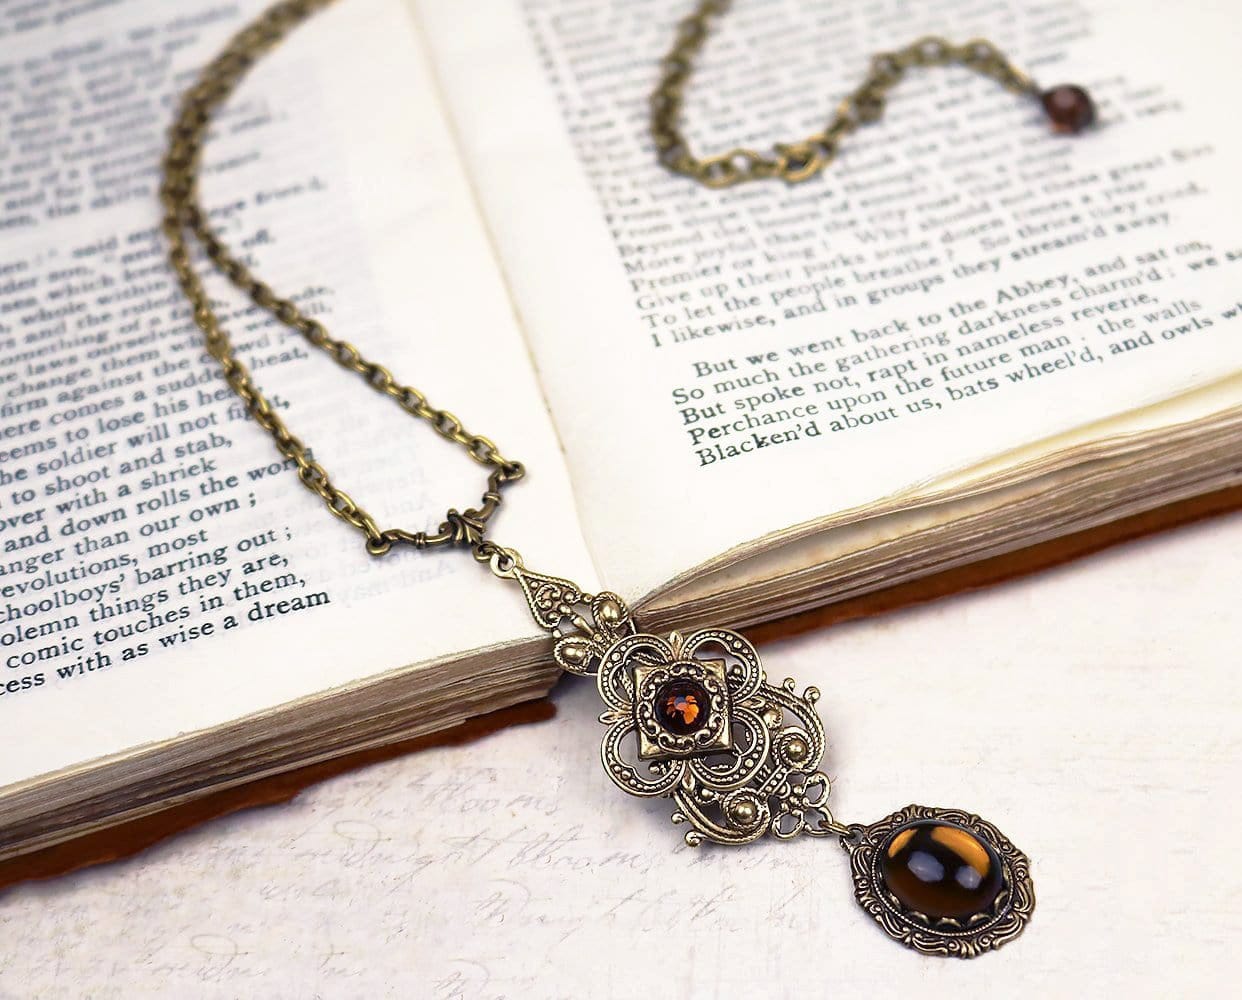 Avalon Pendant Necklace in Smoked Topaz and Antiqued Brass by Rabbitwood and Reason